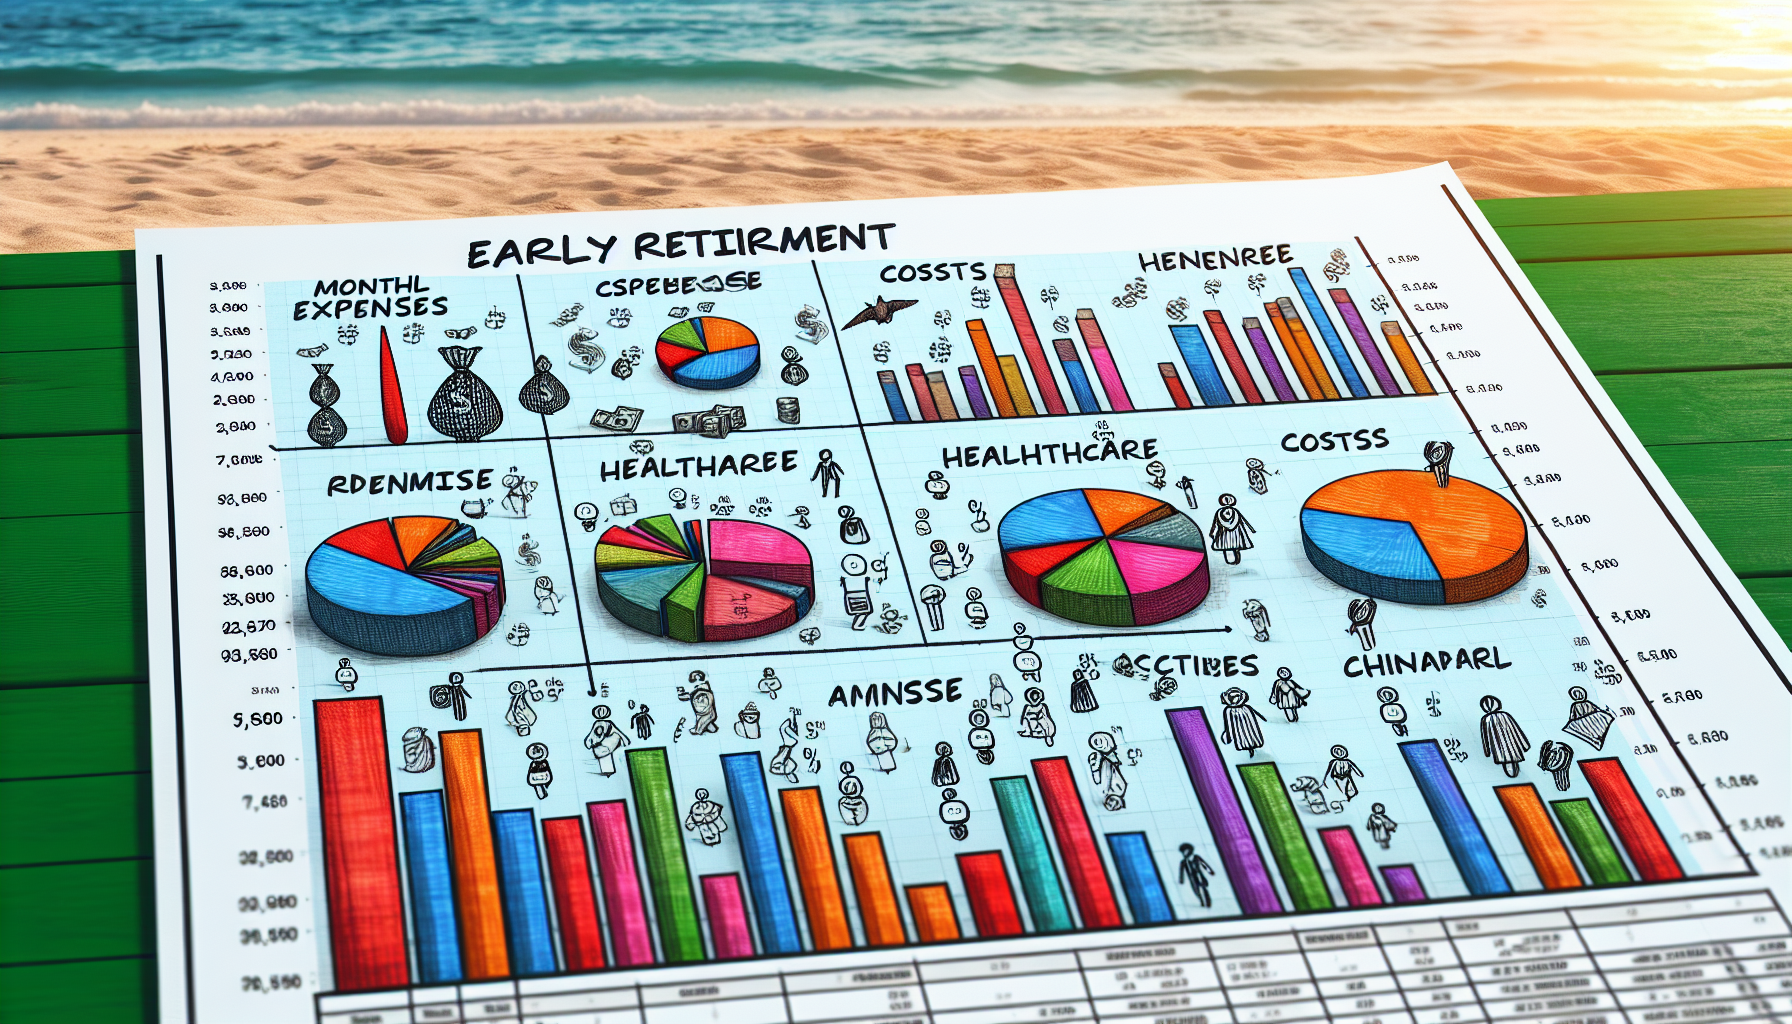 Budget planning for early retirement